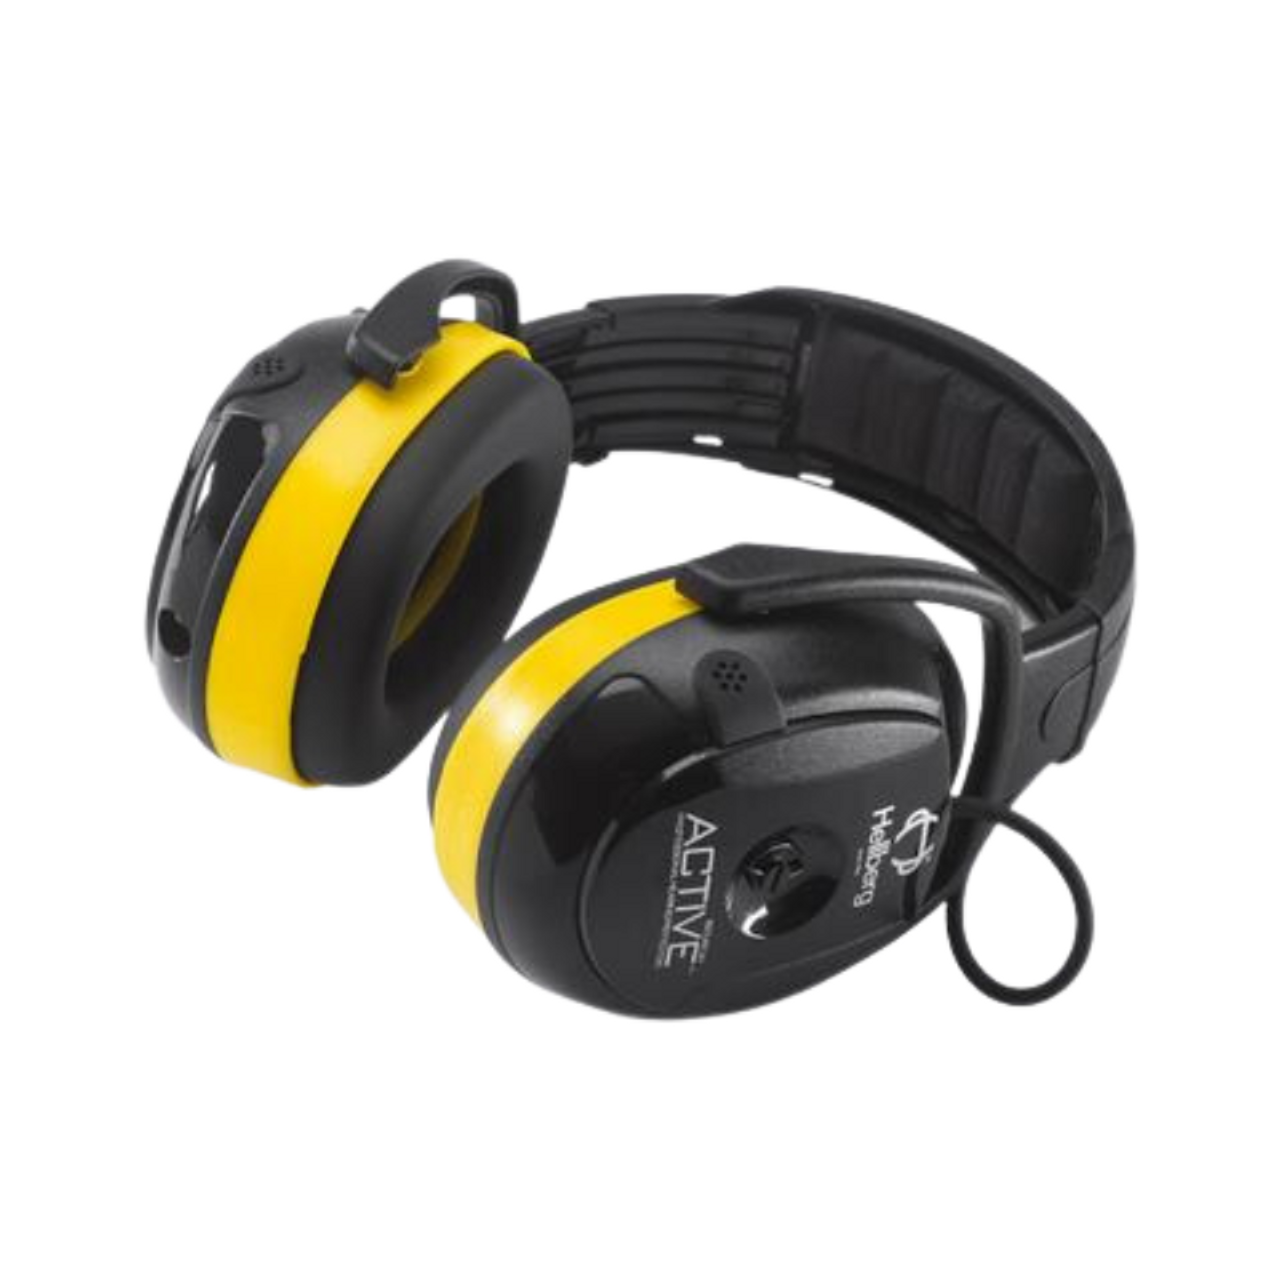 HELLBERG Ear Muffs | ACTIVE Class 2 AUX Input, Active Monitoring Earmuffs  with Headband for Excavator Operators, Landscapers and Rail Industry